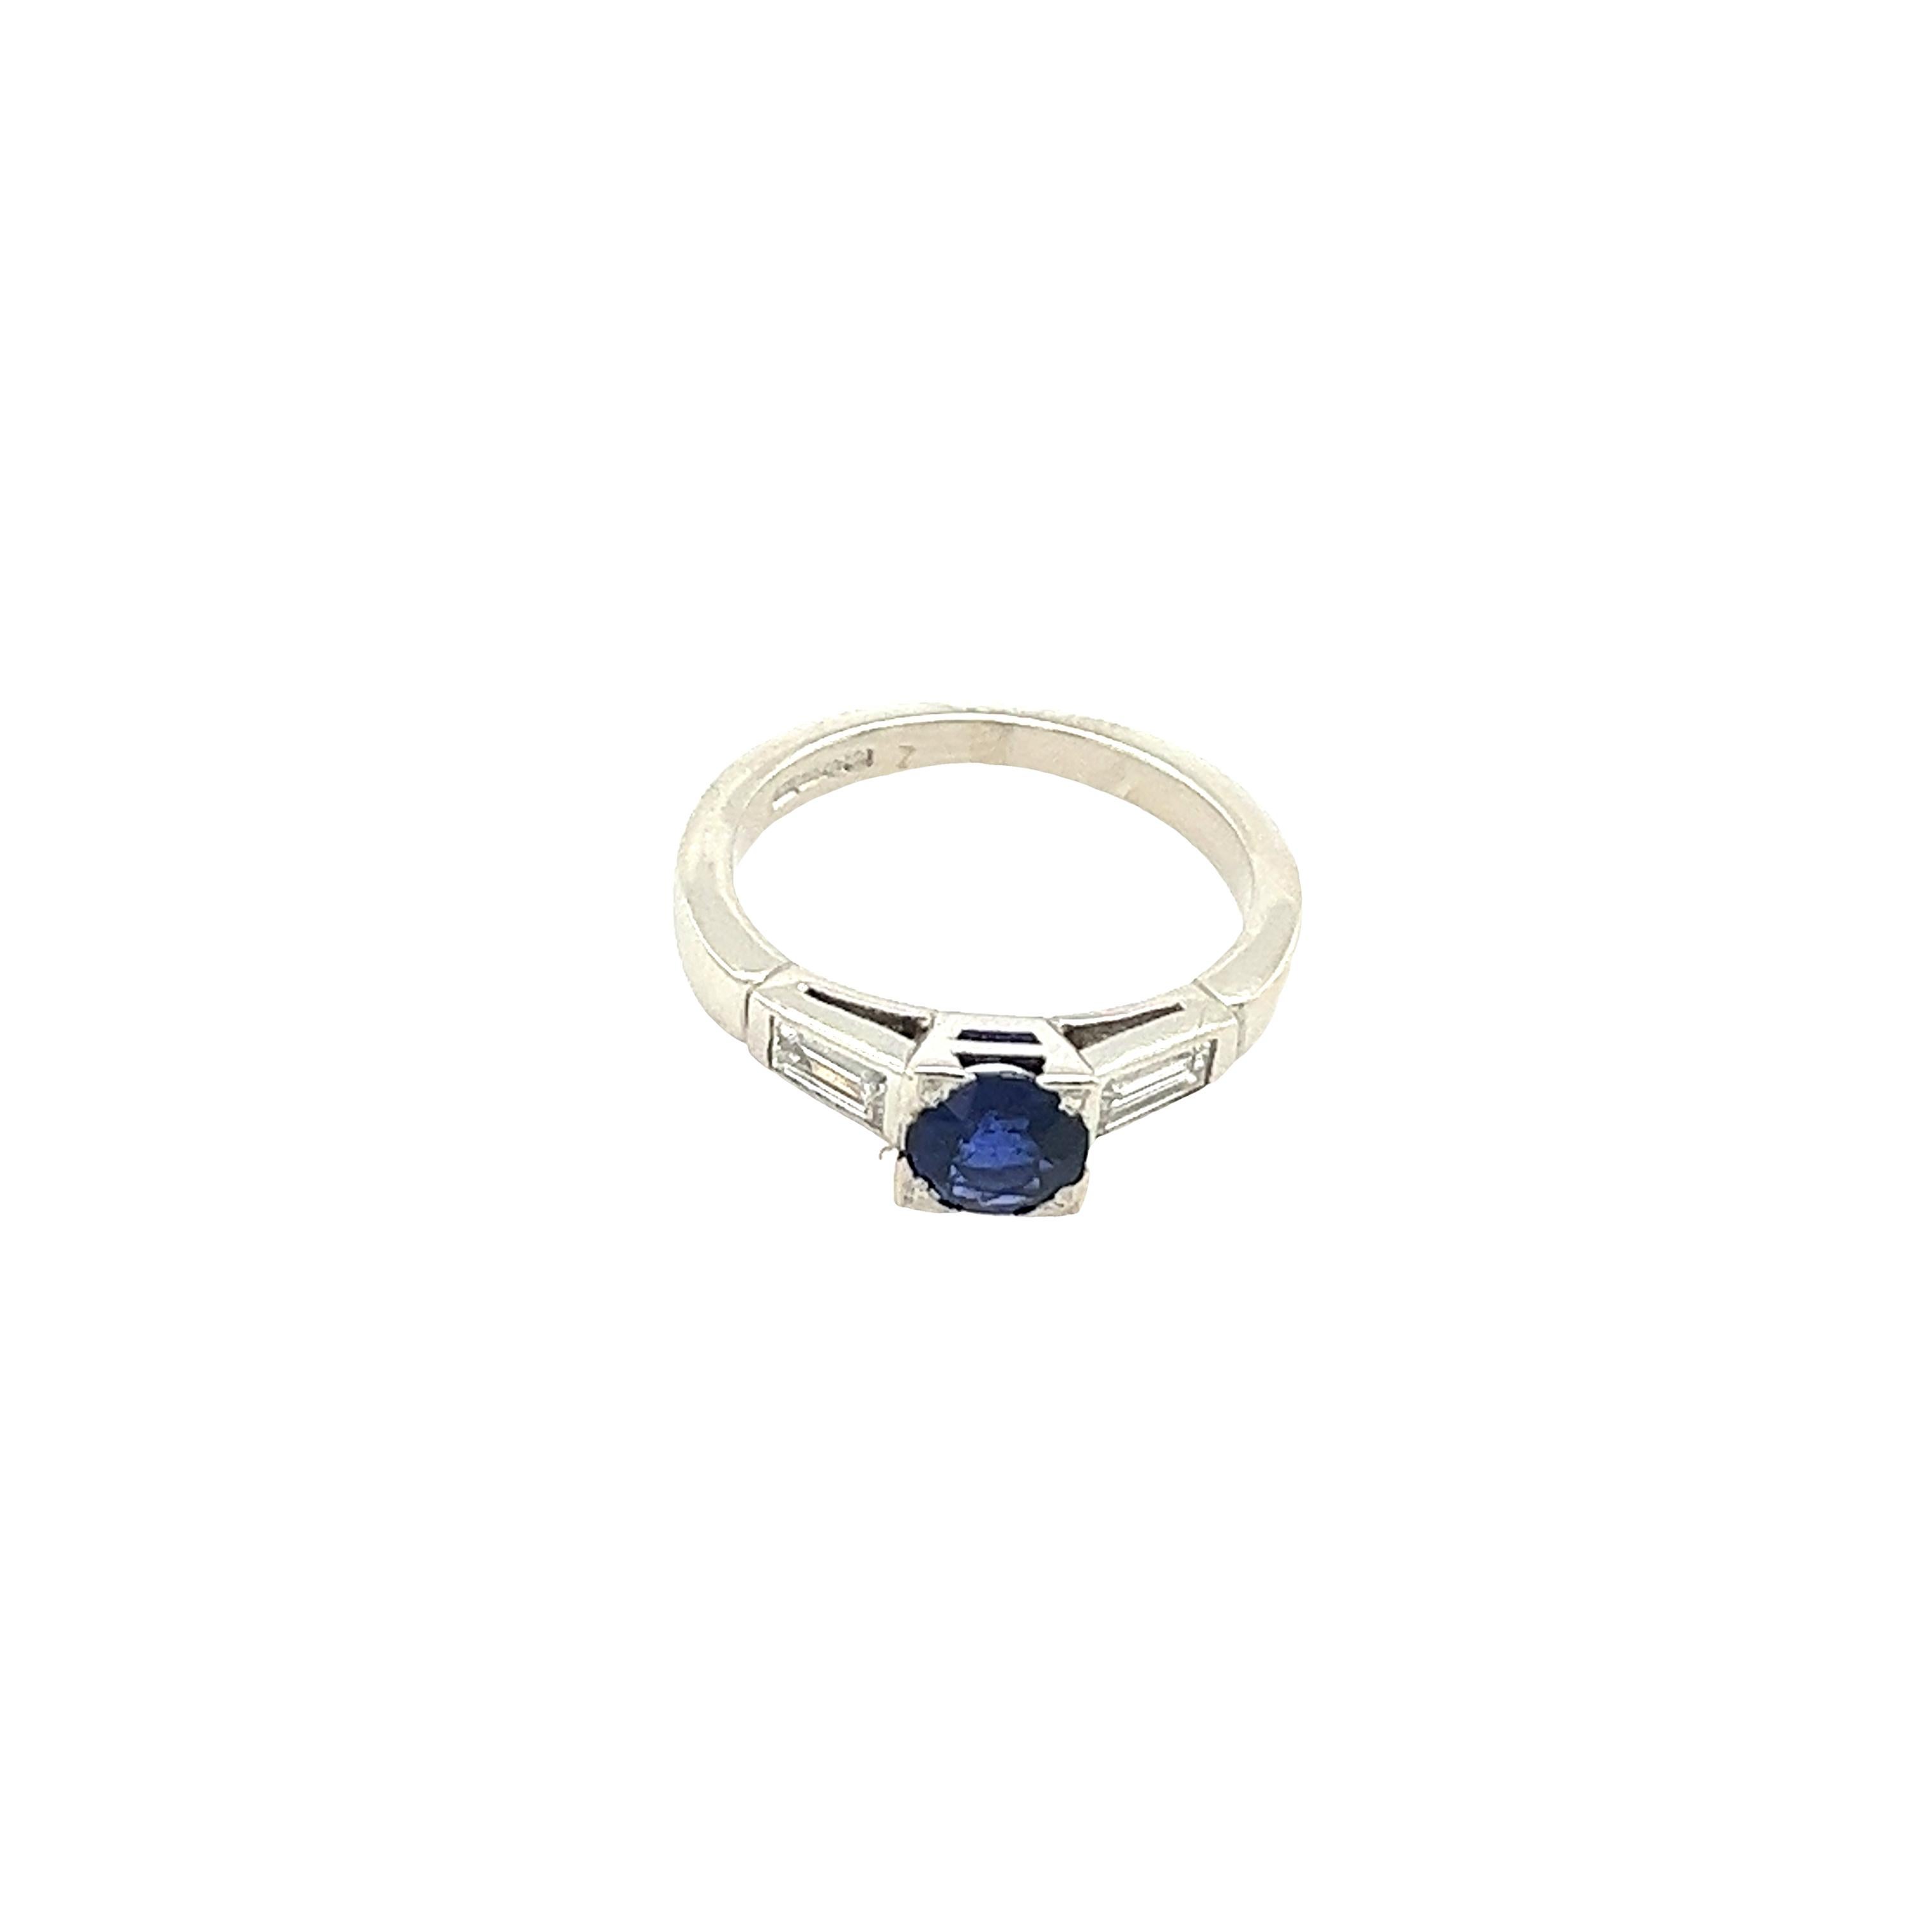 Platinum 0.60ct Sapphire & Diamond Ring Set With 2 Baguettes Diamonds on Sides For Sale 3